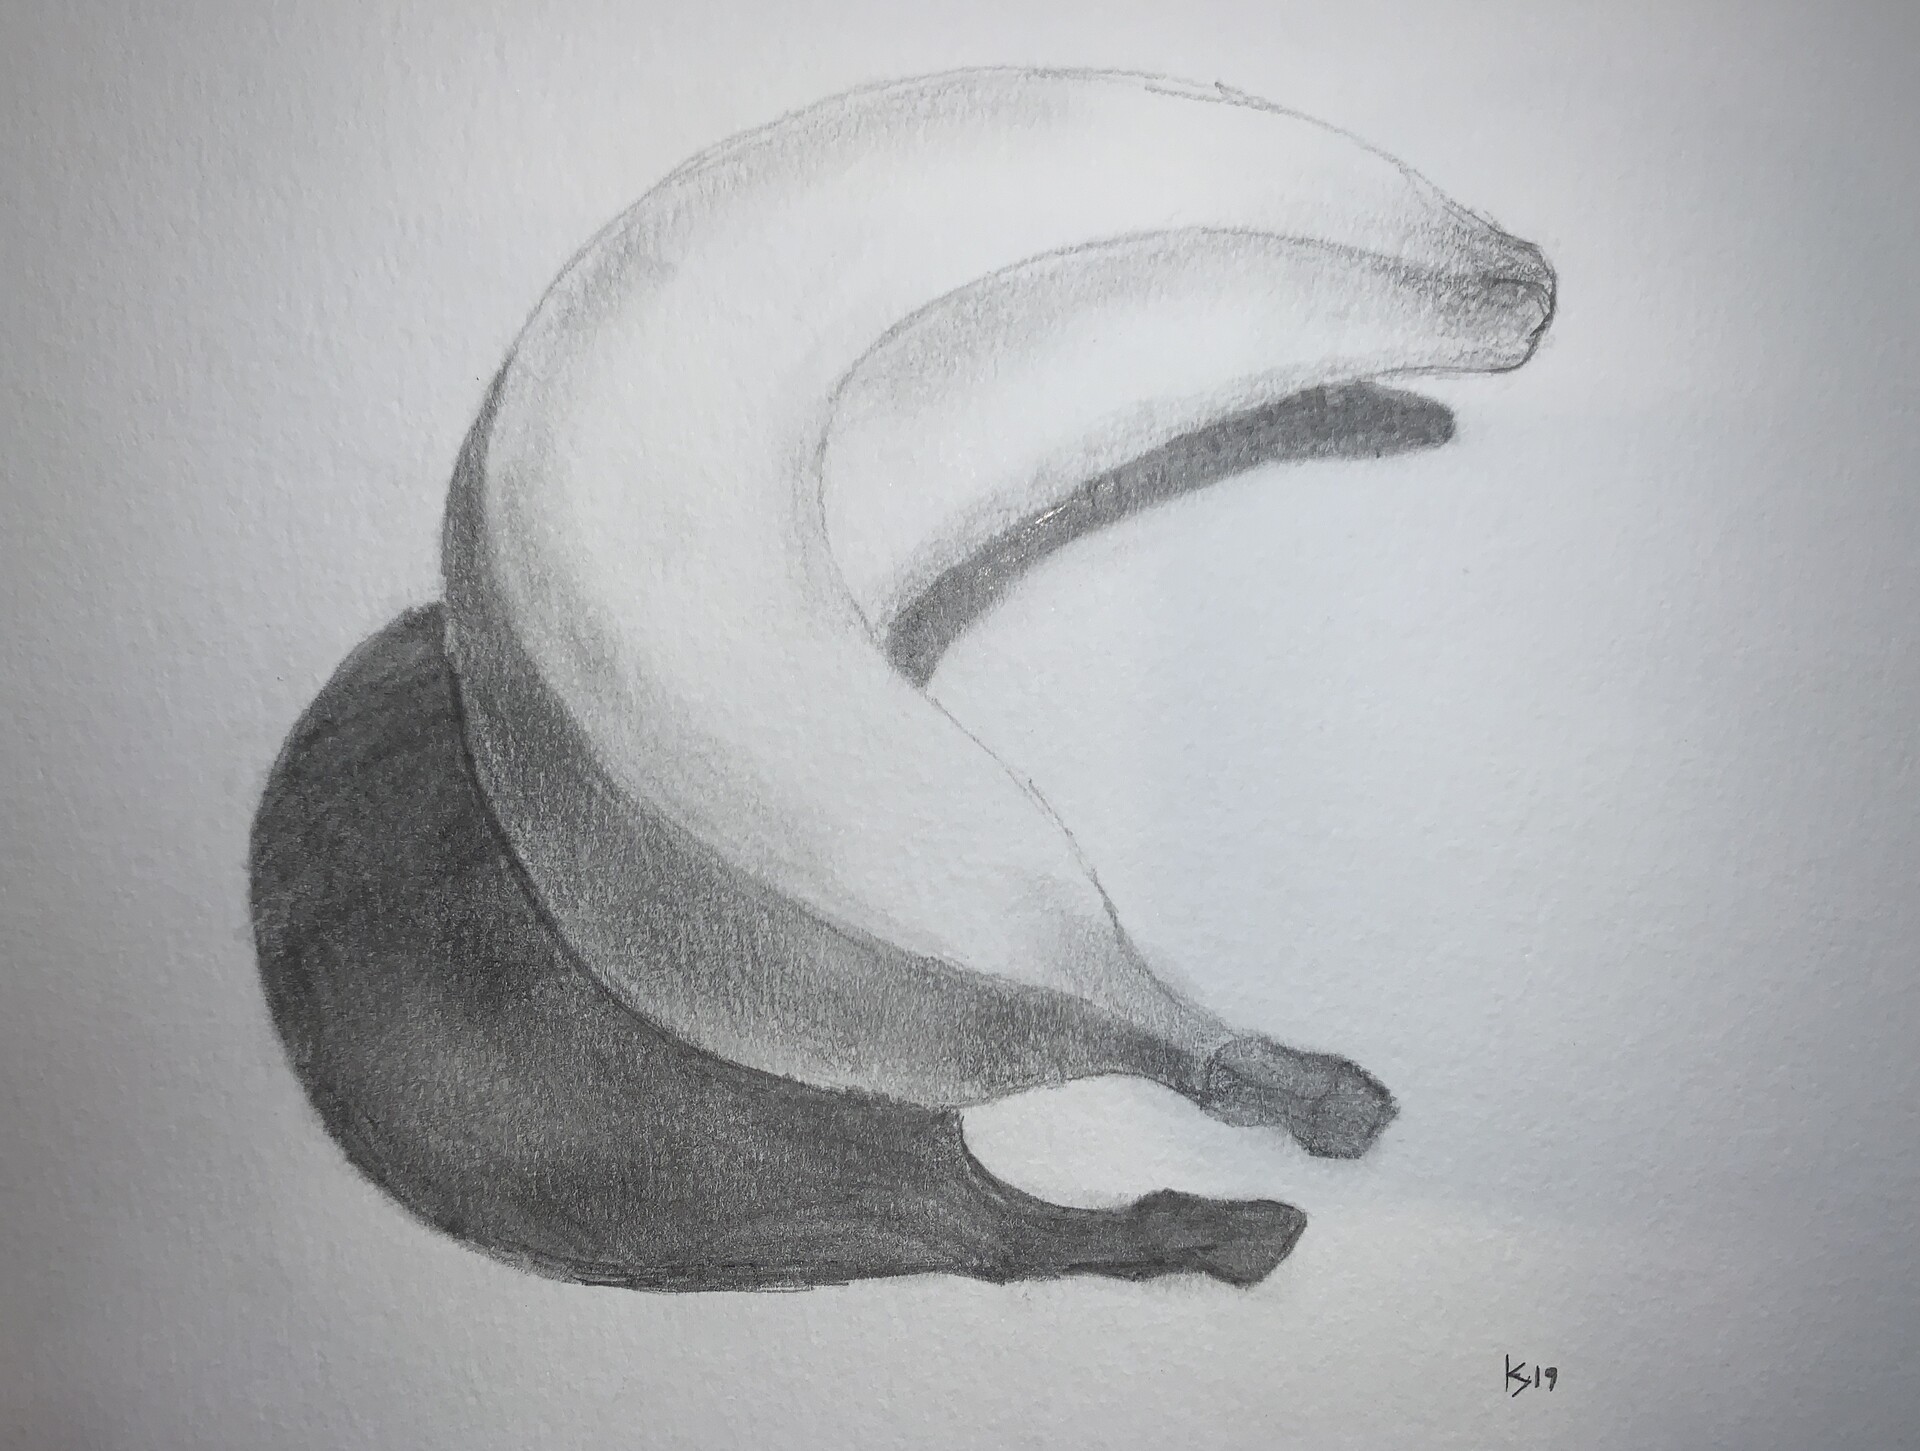 How to Draw a Banana - With the Skin and Peeled